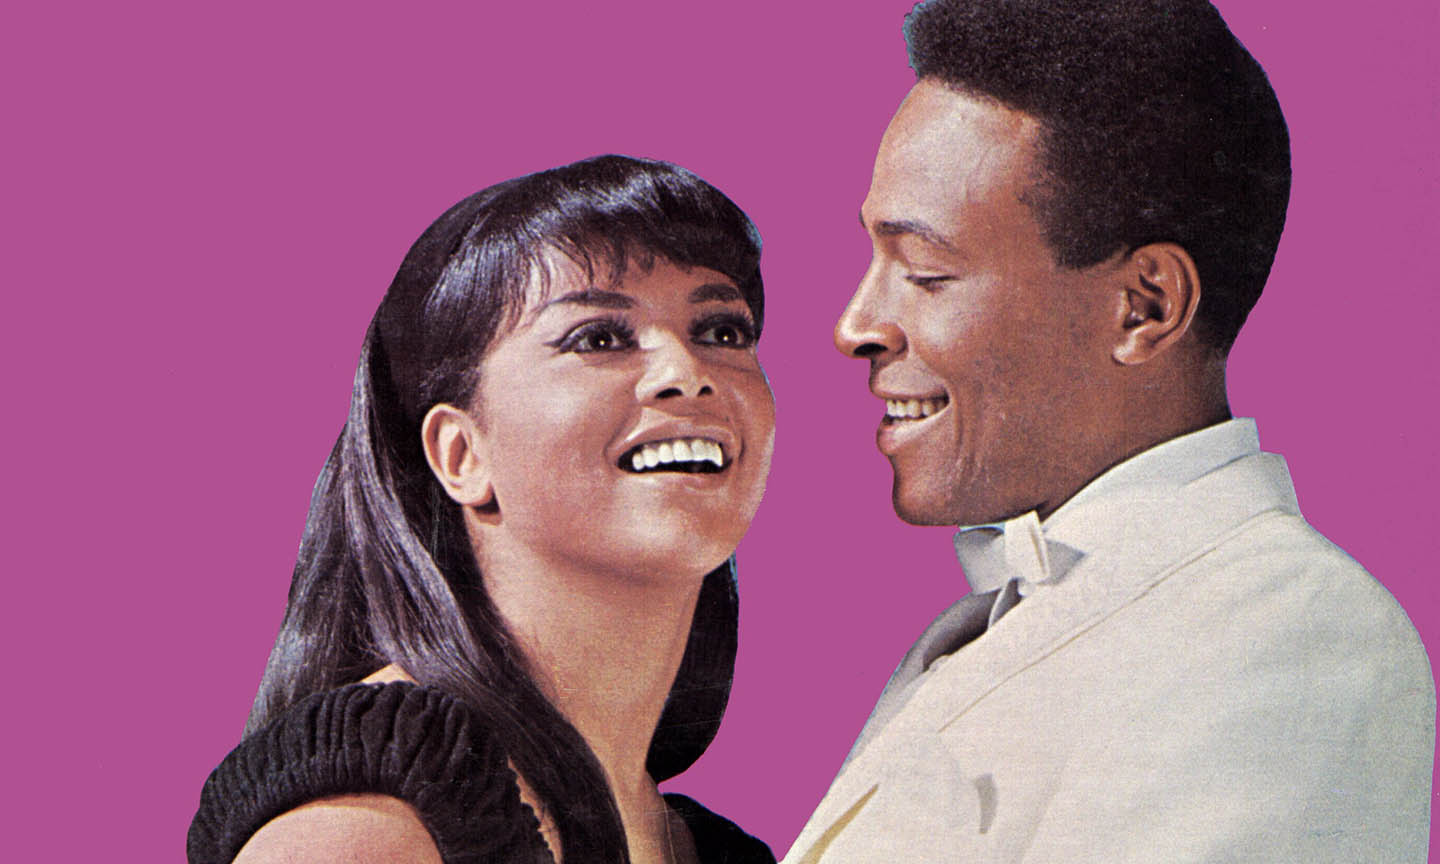 Ain't No Mountain High Enough': Marvin And Tammi's Pop Classic